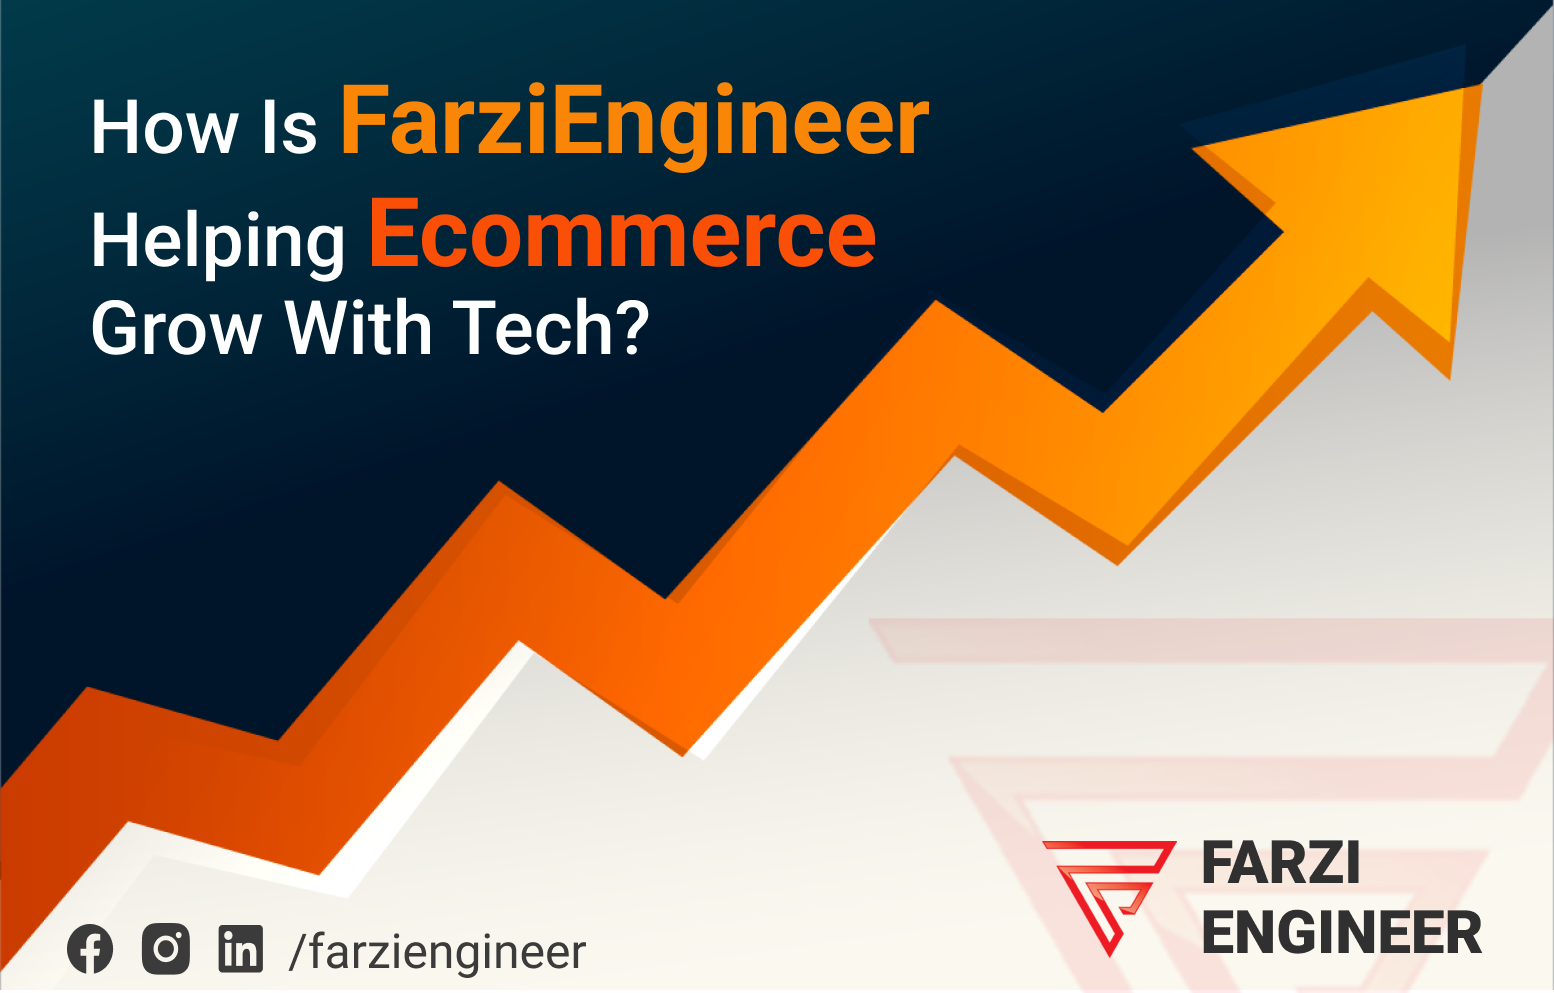 How Is FarziEngineer Helping Ecommerce Grow With Tech?